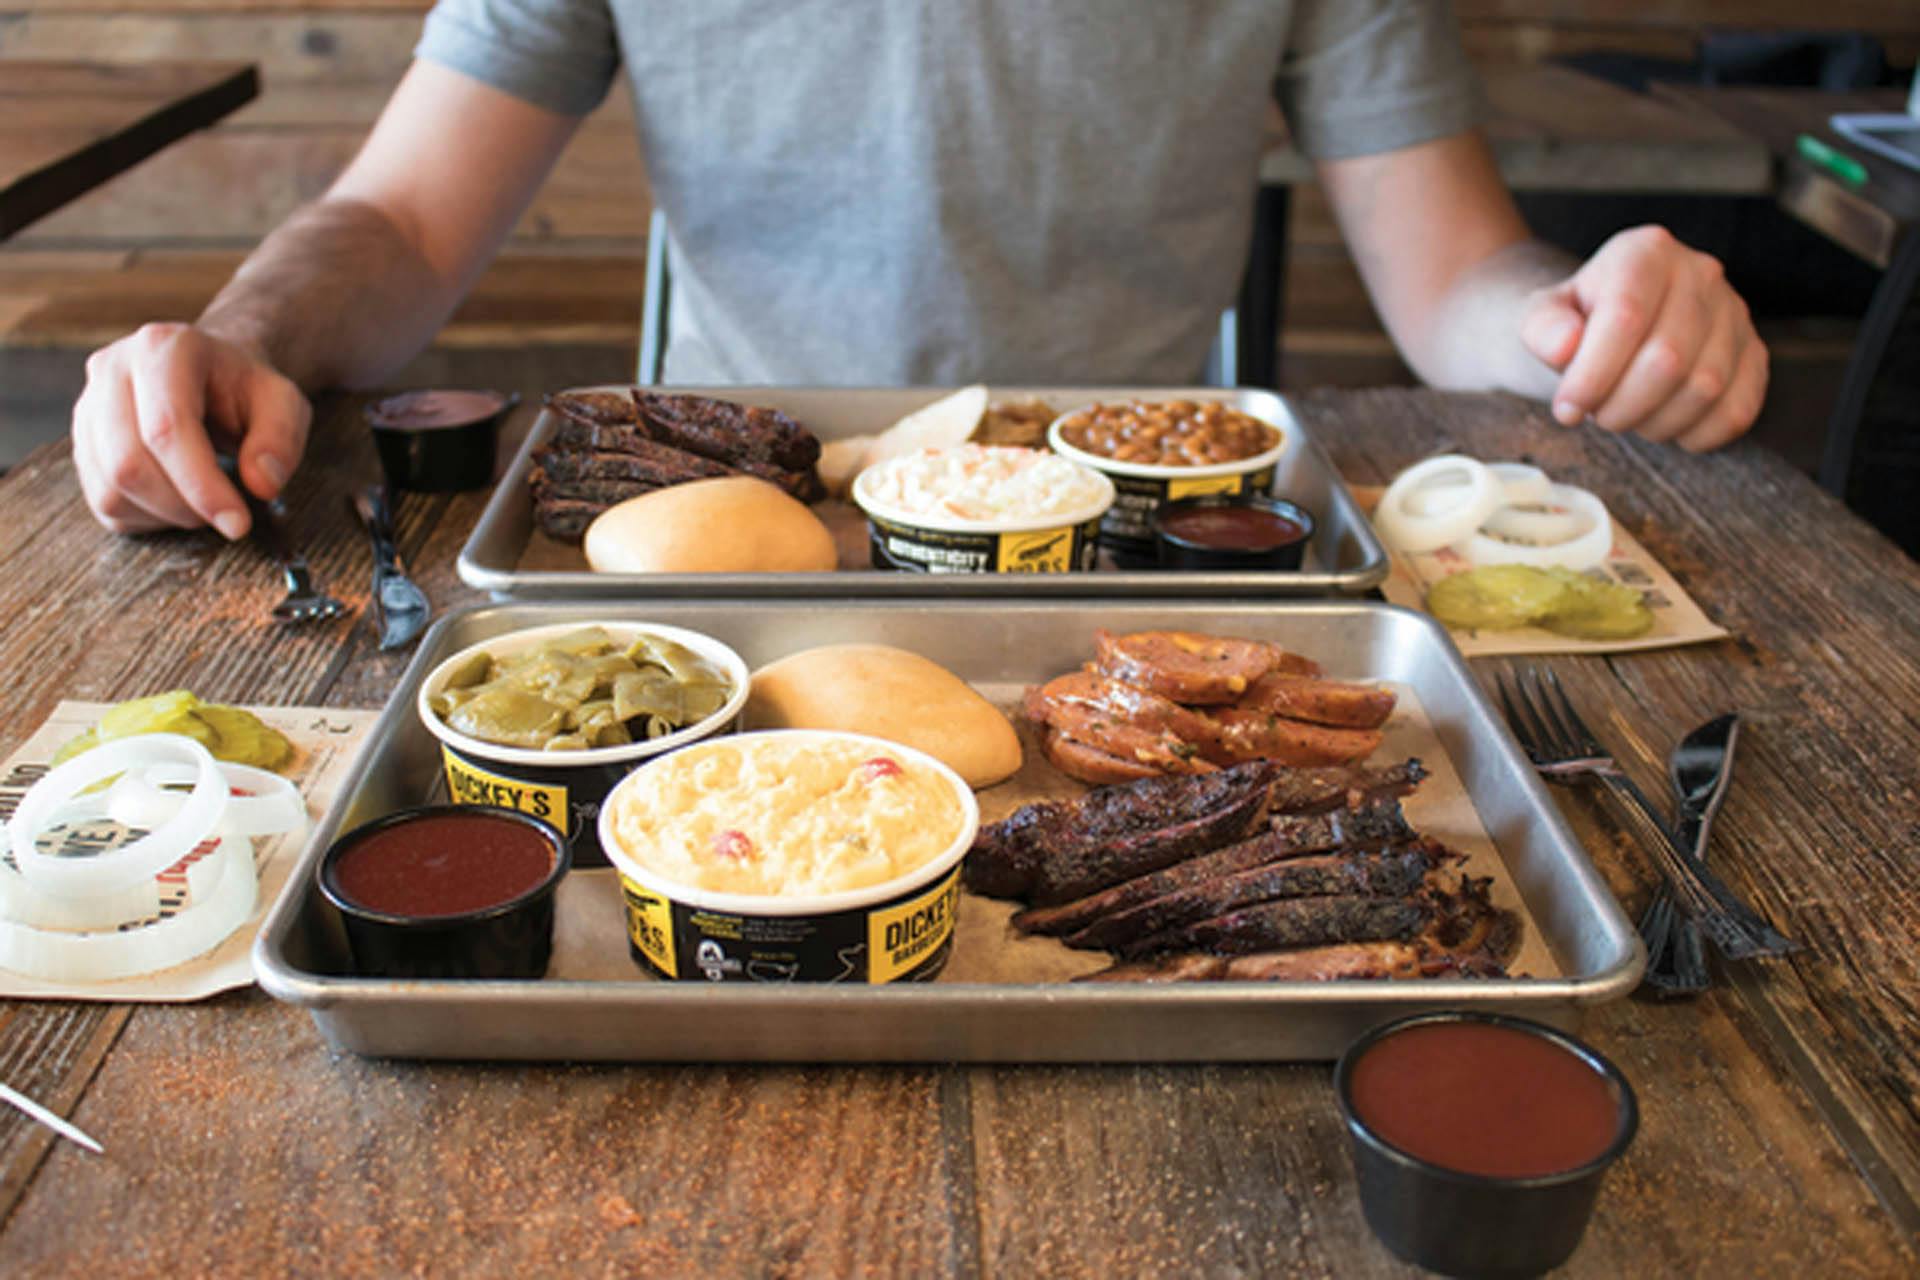 WKYC NBC 3: Dickey's Barbecue Pit